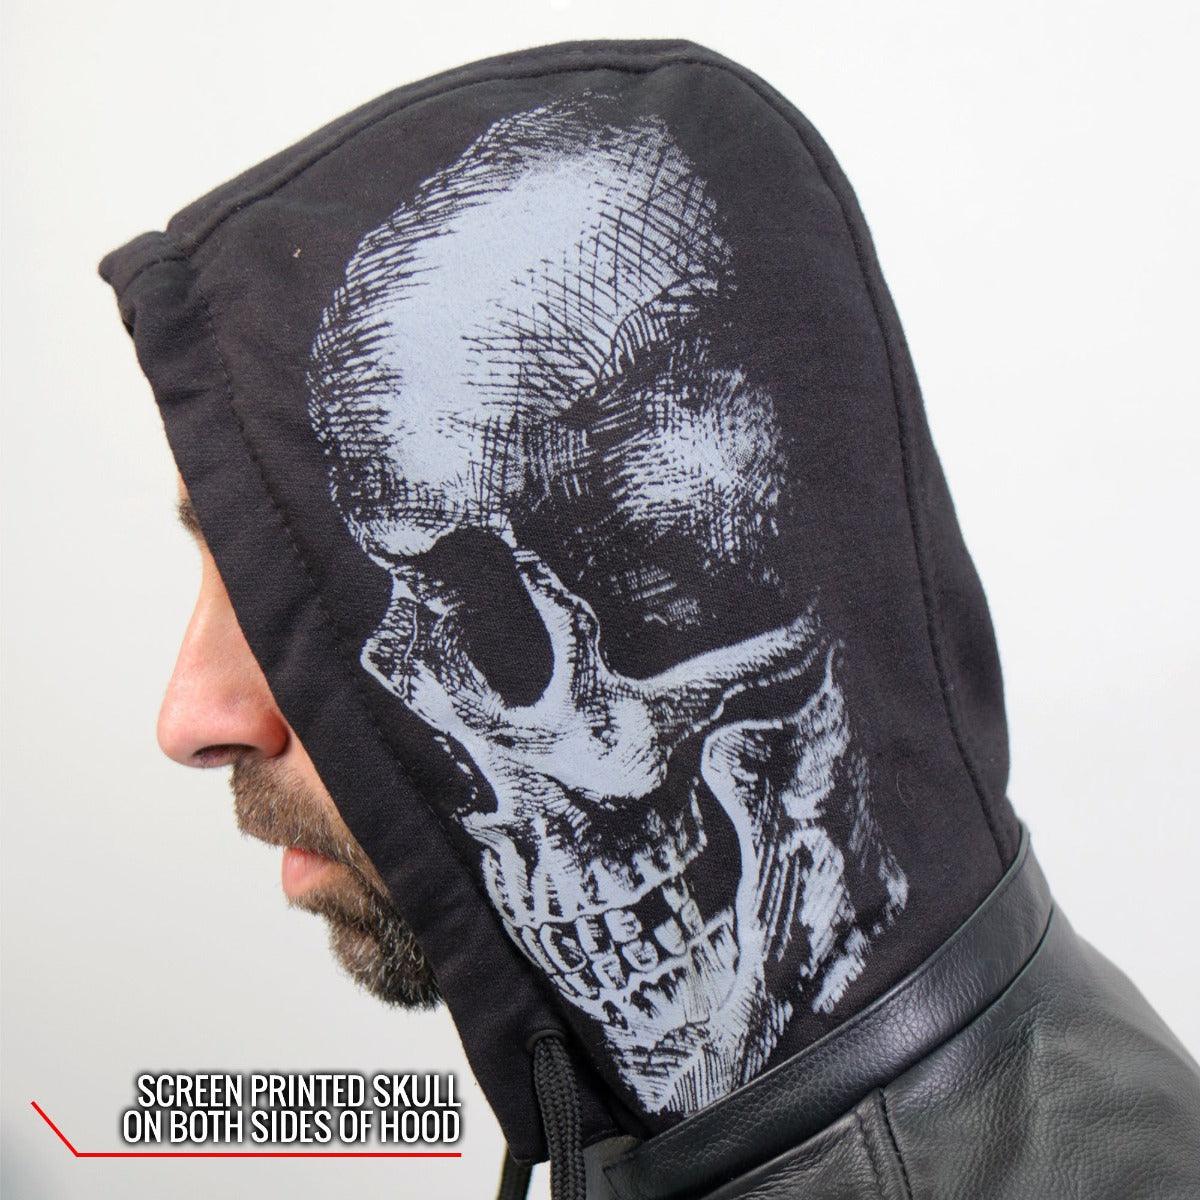 Hot Leather Skull And Bones Armored Leather Jacket With Flannel Lining - American Legend Rider